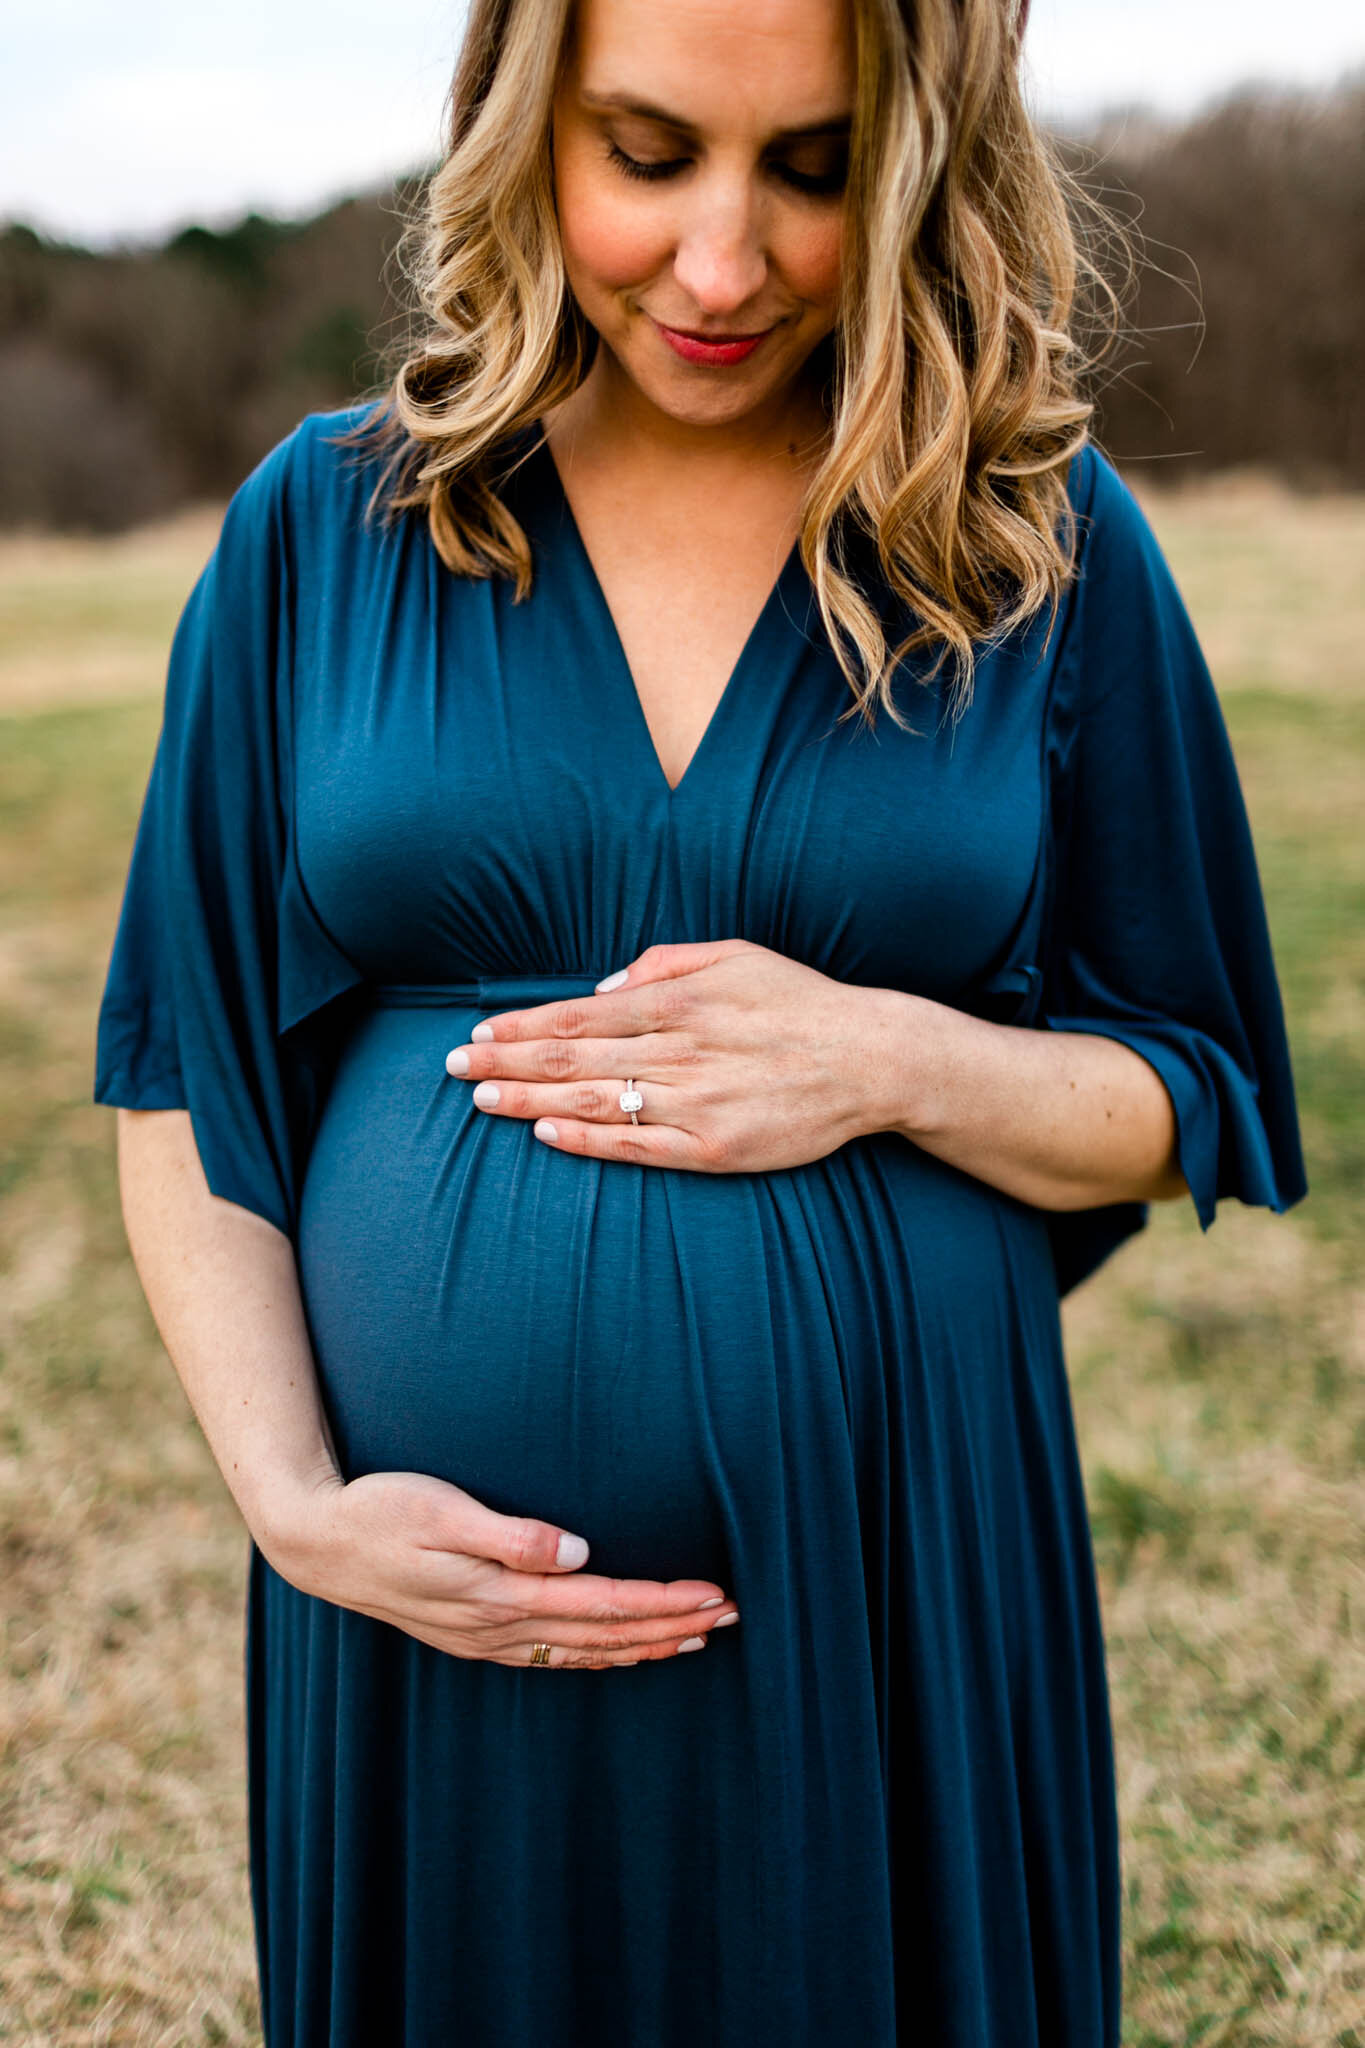 Raleigh Newborn Photographer | By G. Lin Photography | Gorgeous maternity portrait of woman in blue dress with hands on baby bump